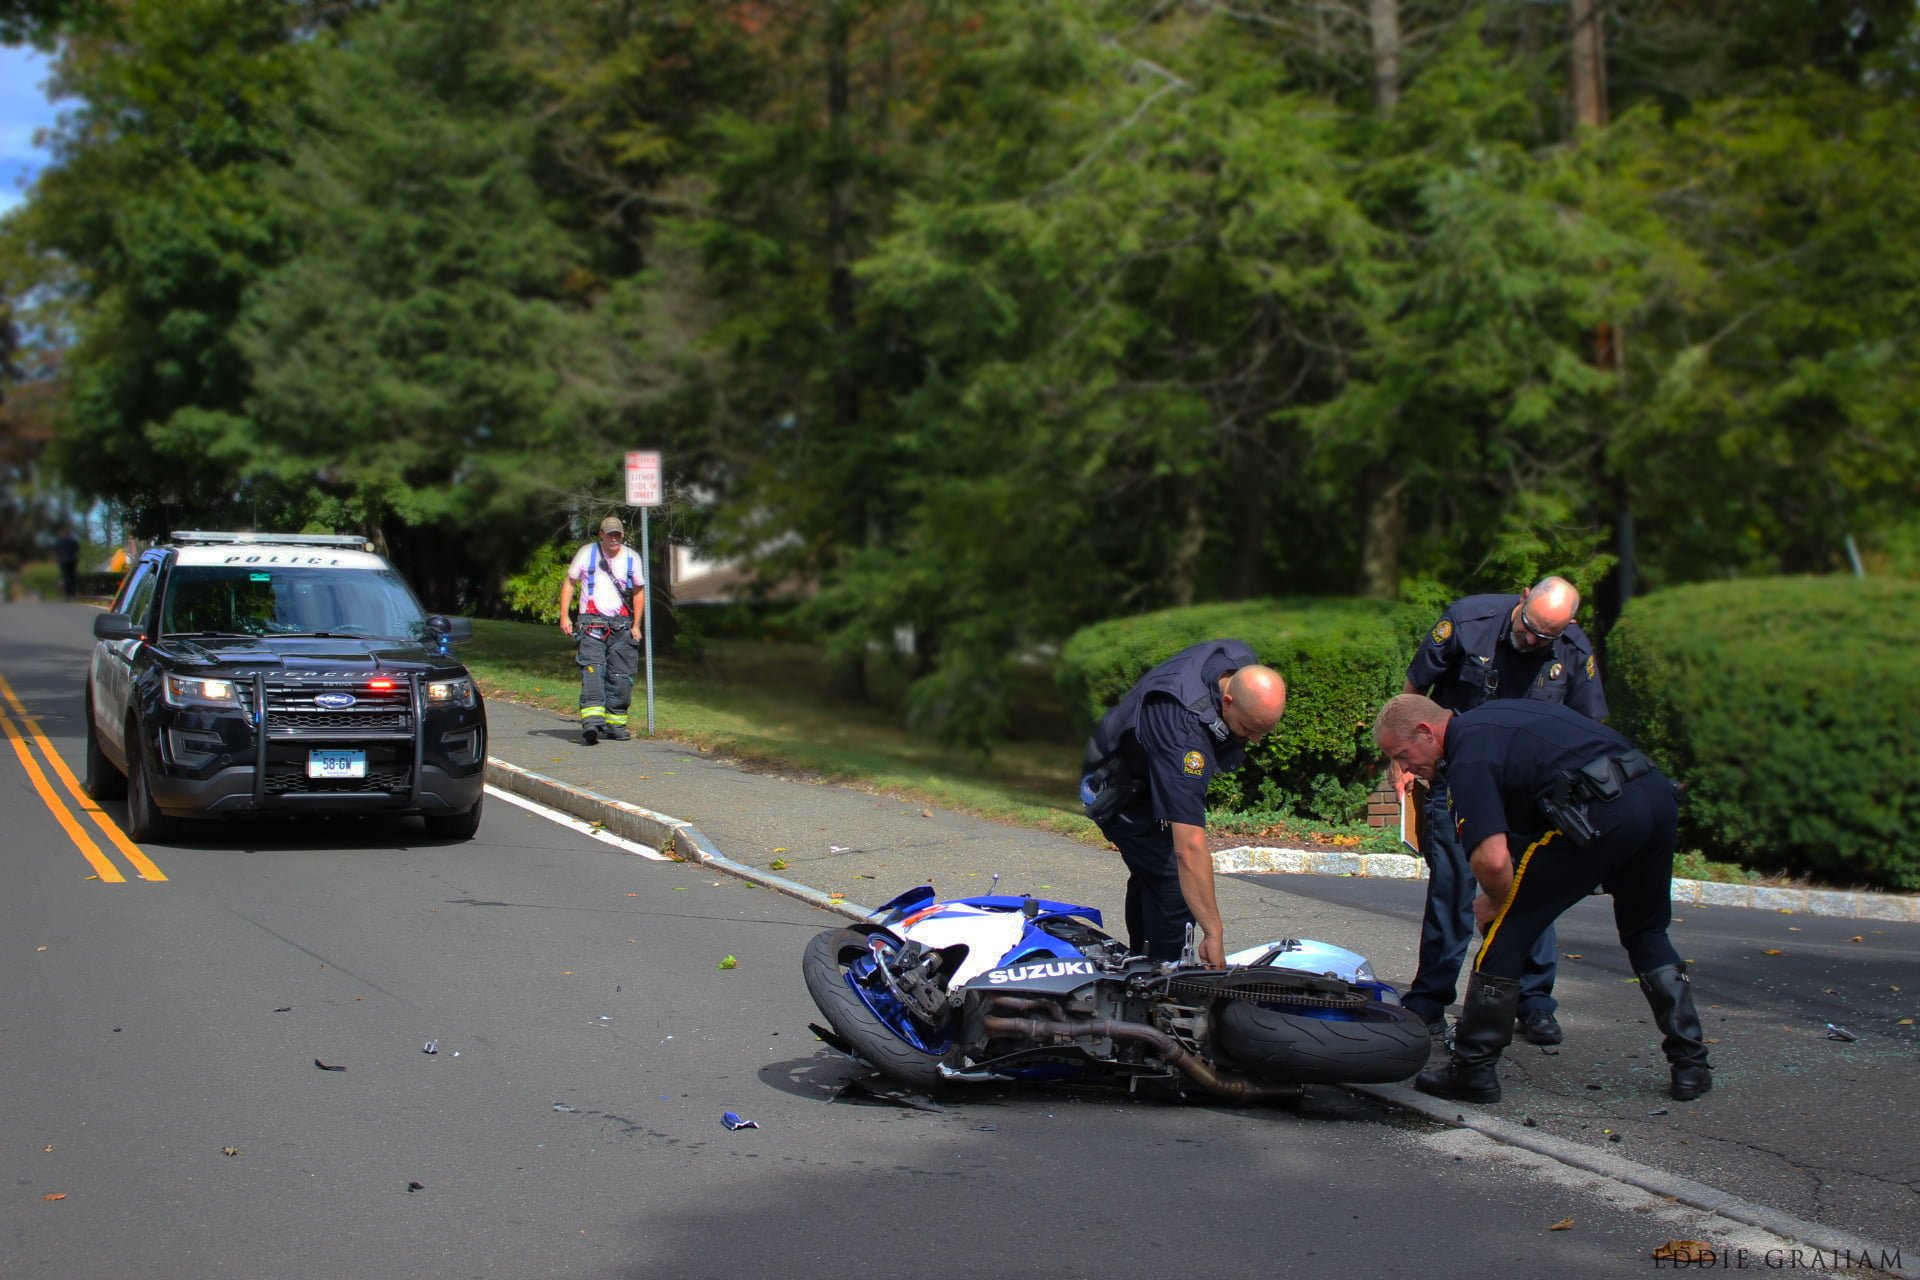 Investigation of scene where motorcycle collided with car on October 10, 2017. PHOTO courtesy of Eddie Graham